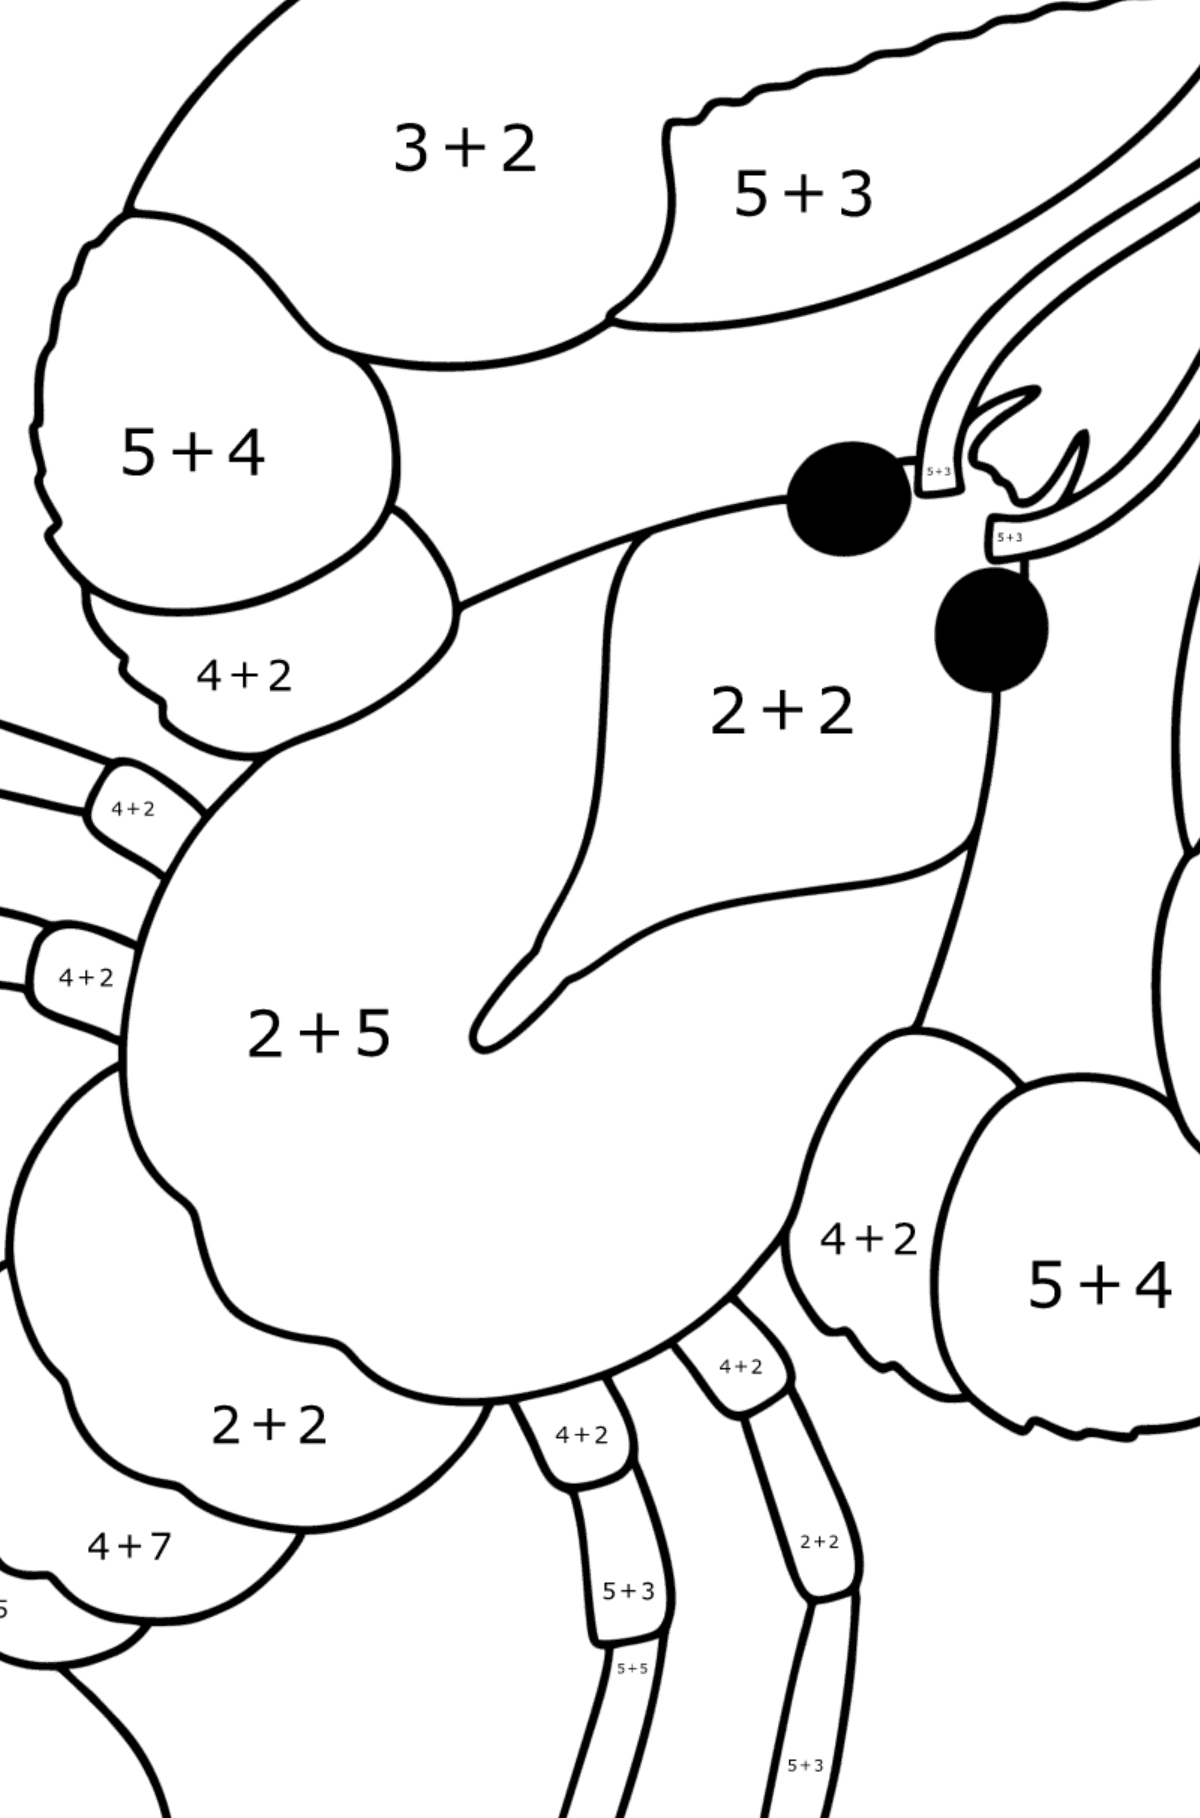 Lobster coloring page - Math Coloring - Addition for Kids